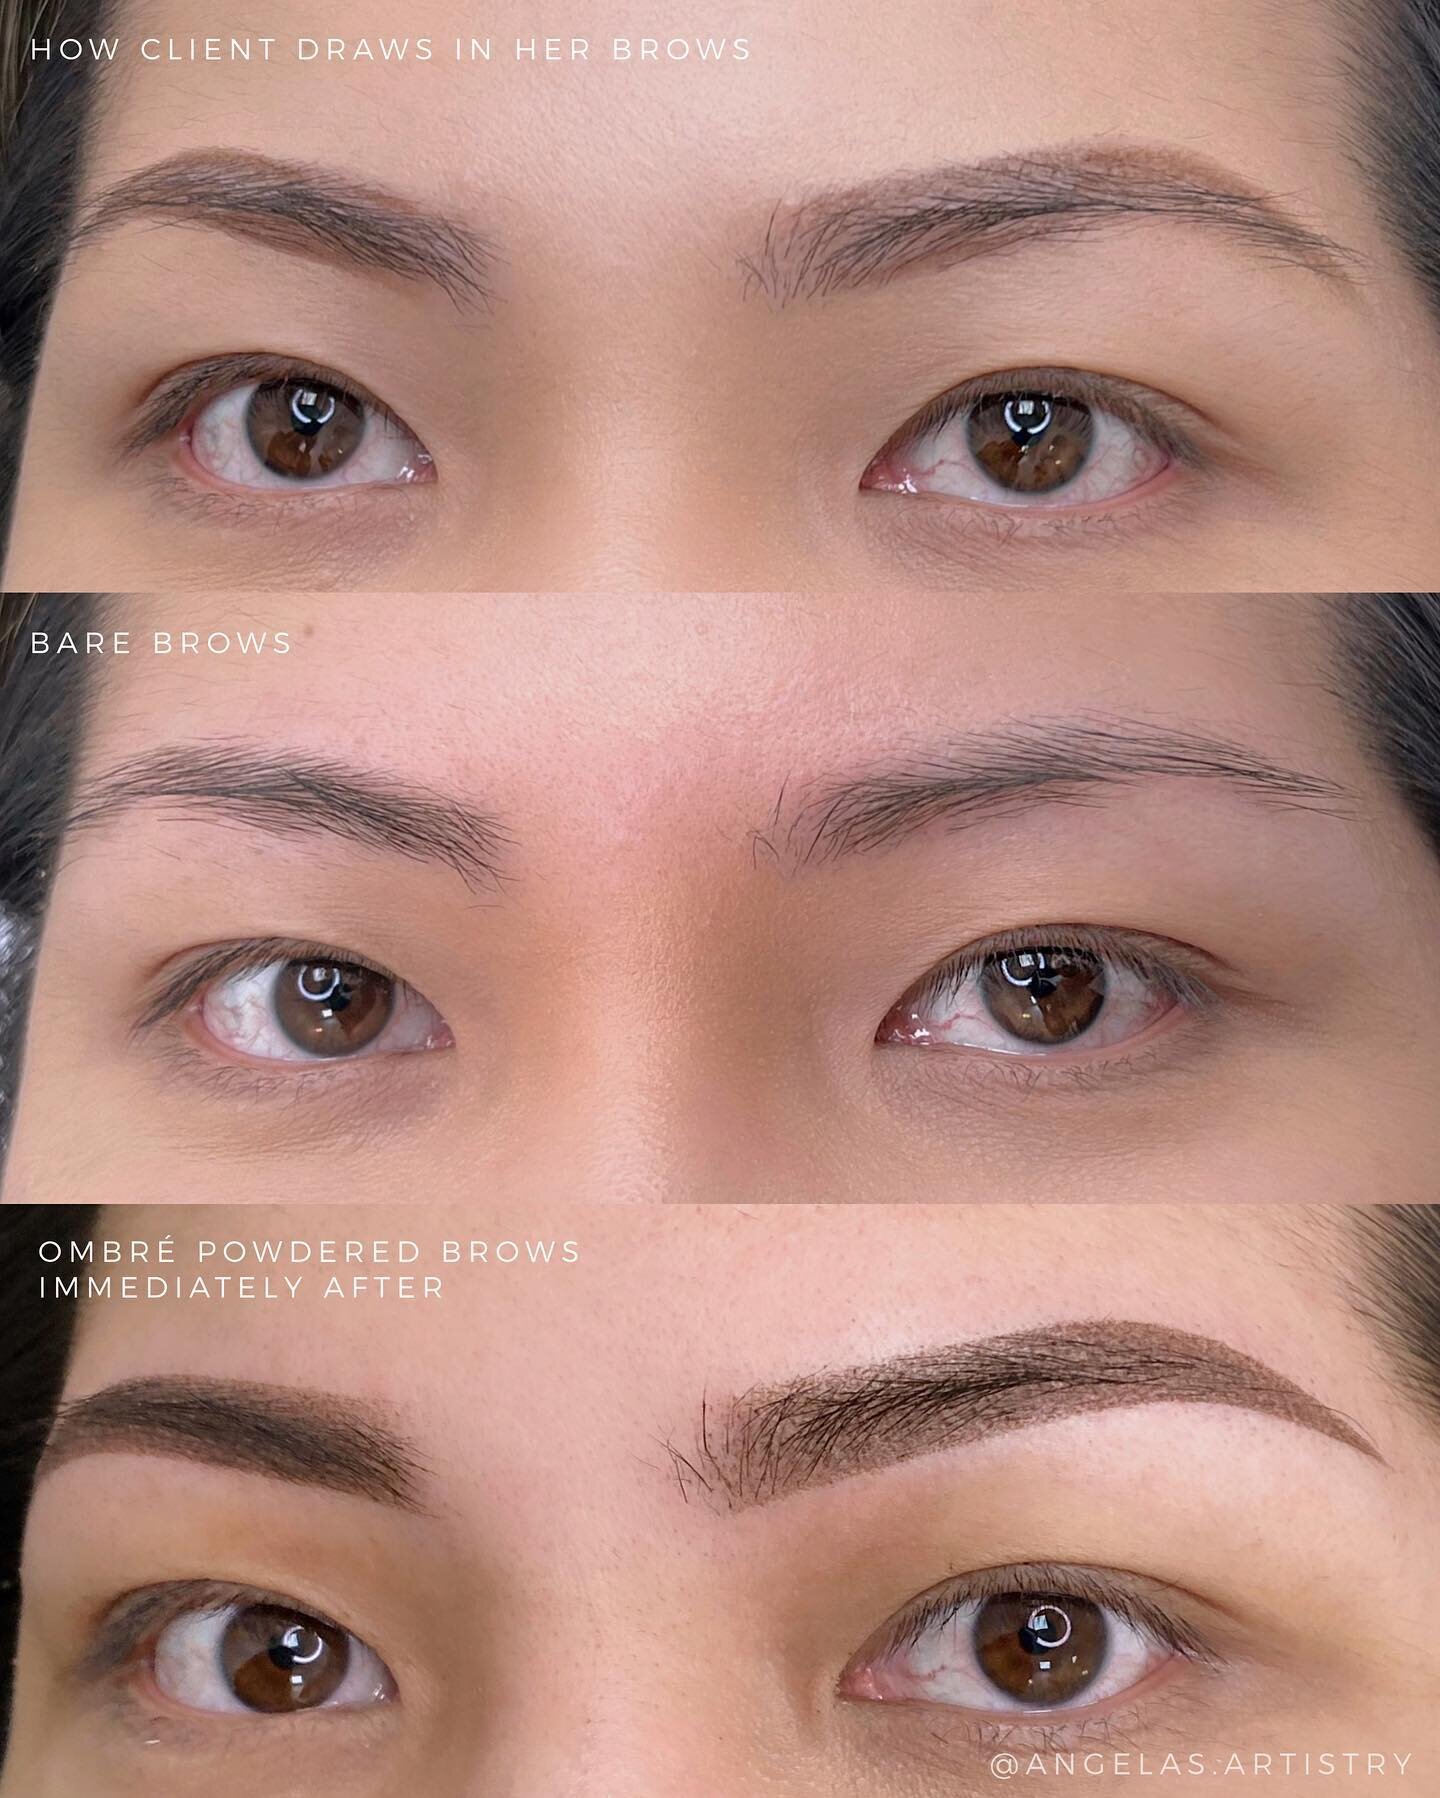 Her brows but better 🤩
If you&rsquo;ve been waiting to get your brows done. The time is now before summer comes 😊💕

Ombr&eacute; Powdered Brows 
__________________________________________

𝘼𝙥𝙥𝙤𝙞𝙣𝙩𝙢𝙚𝙣𝙩 𝙩𝙞𝙢𝙚: 2.5 - 3 hours

𝙃𝙚𝙖𝙡𝙞